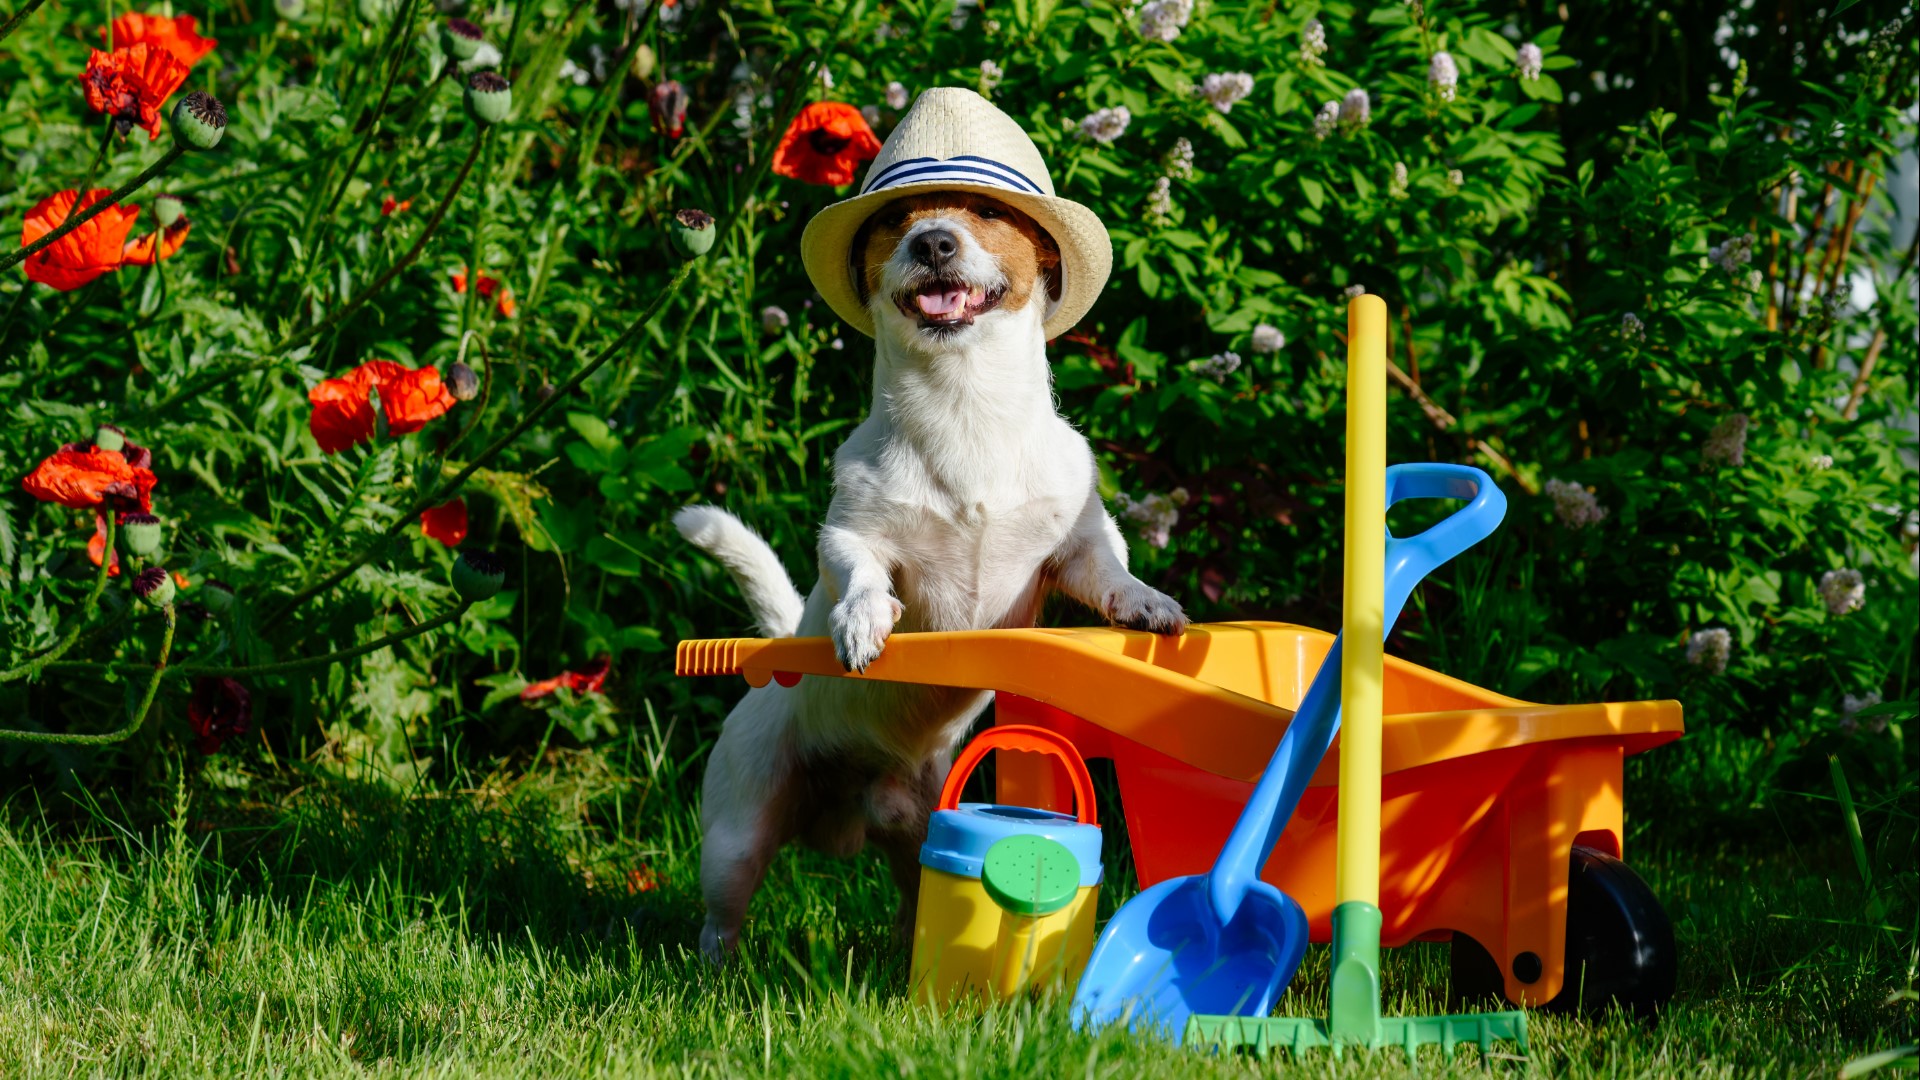 Our pets love exploring the outdoors, and gardens can be especially tempting for curious cats and dogs. So, before letting them play in the yard, make sure that your lawn care habits are pet-friendly.